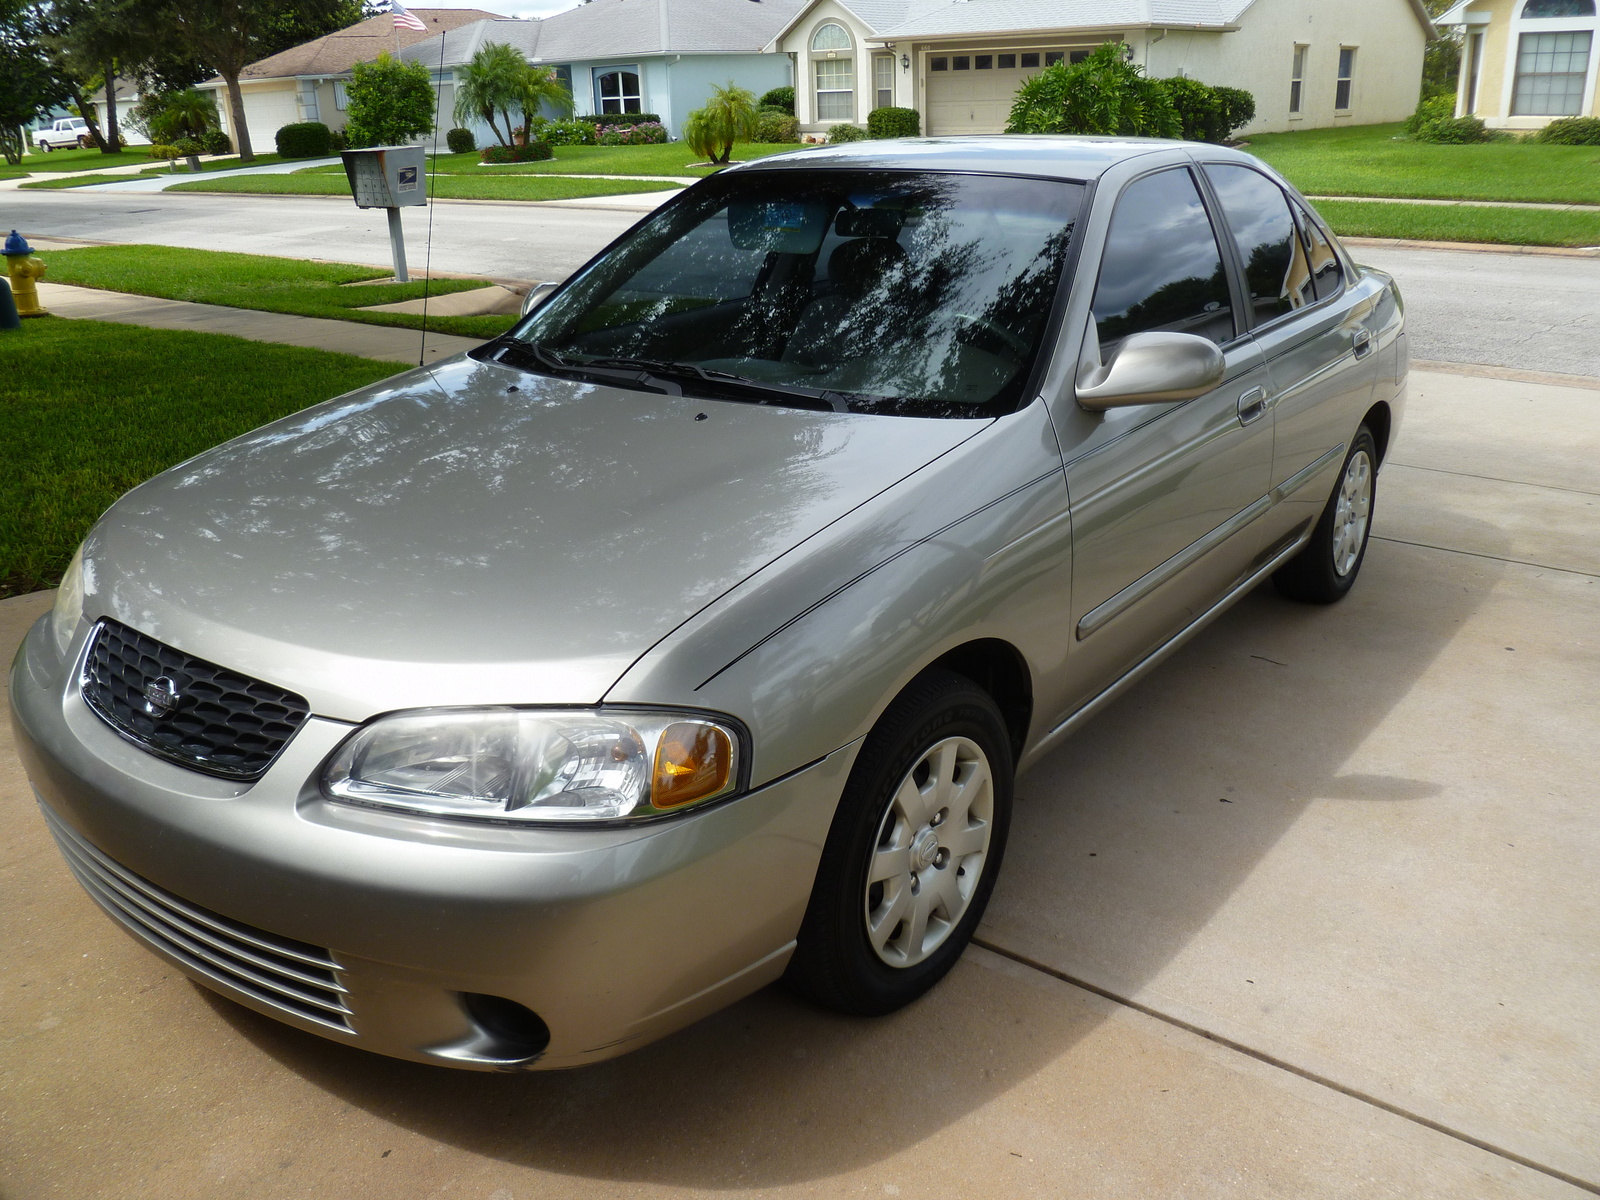 2001 Nissan sentra gxe review #9